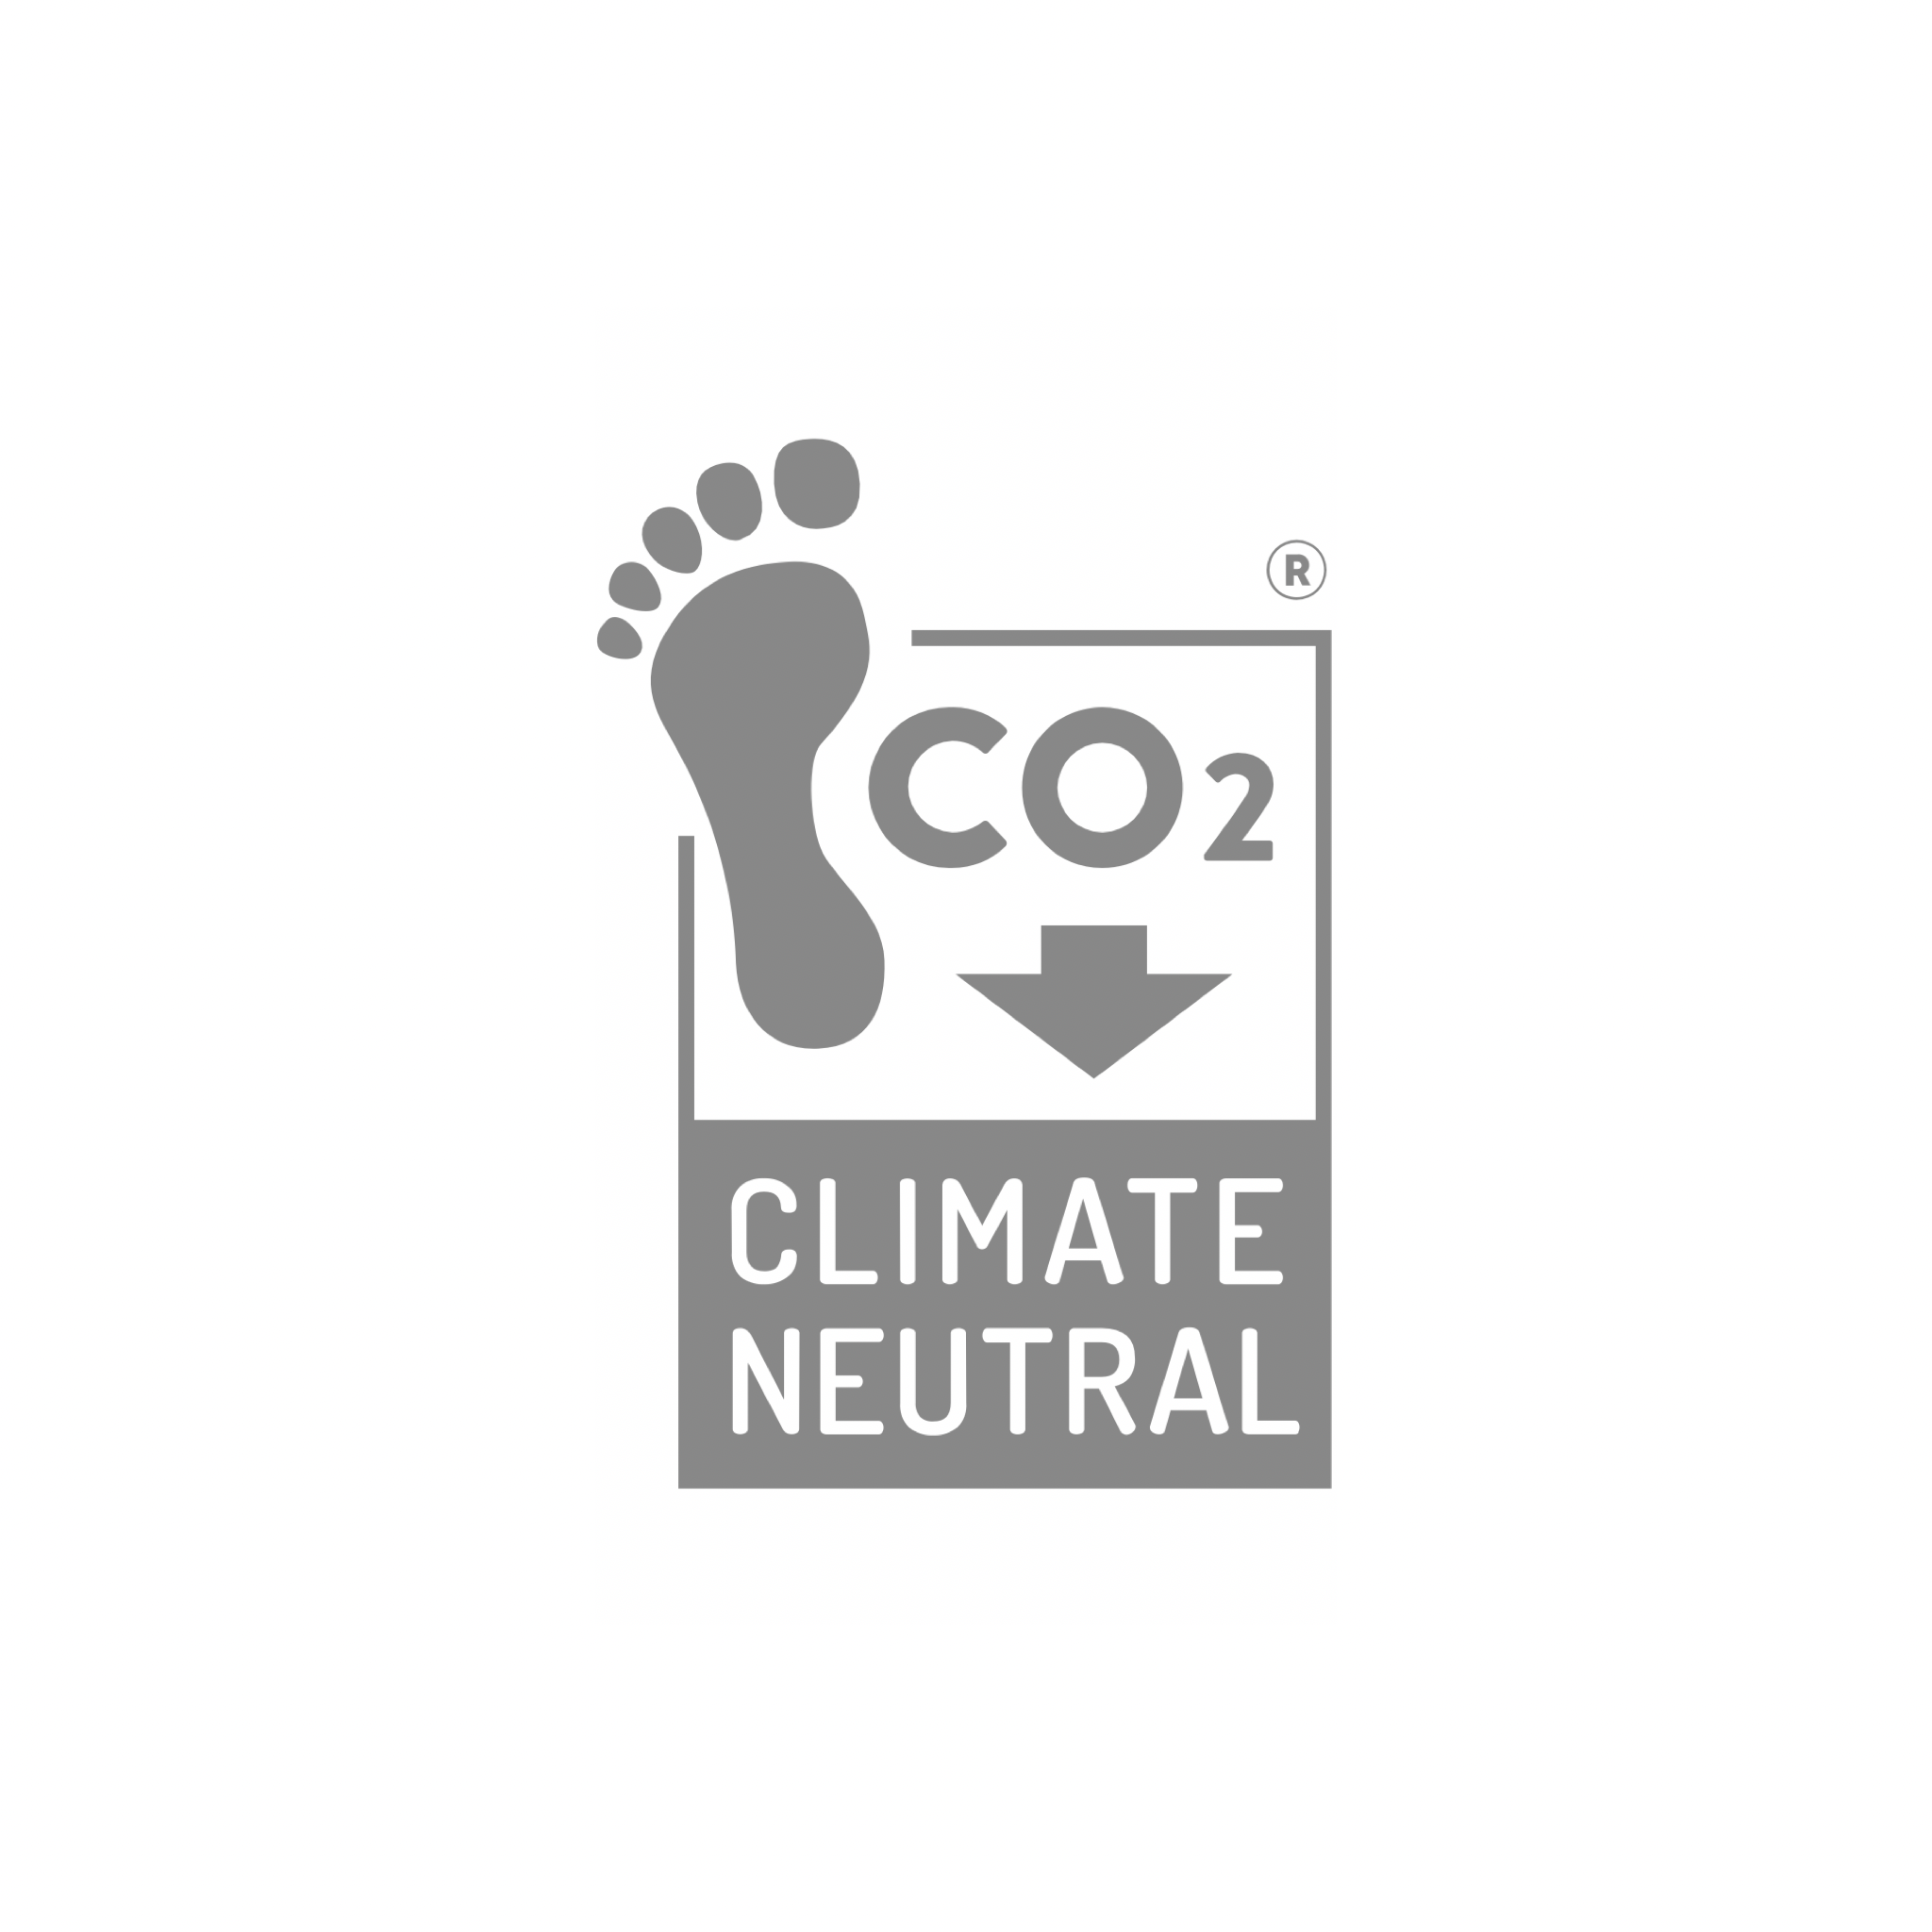 CLIMATE_NEUTRAL